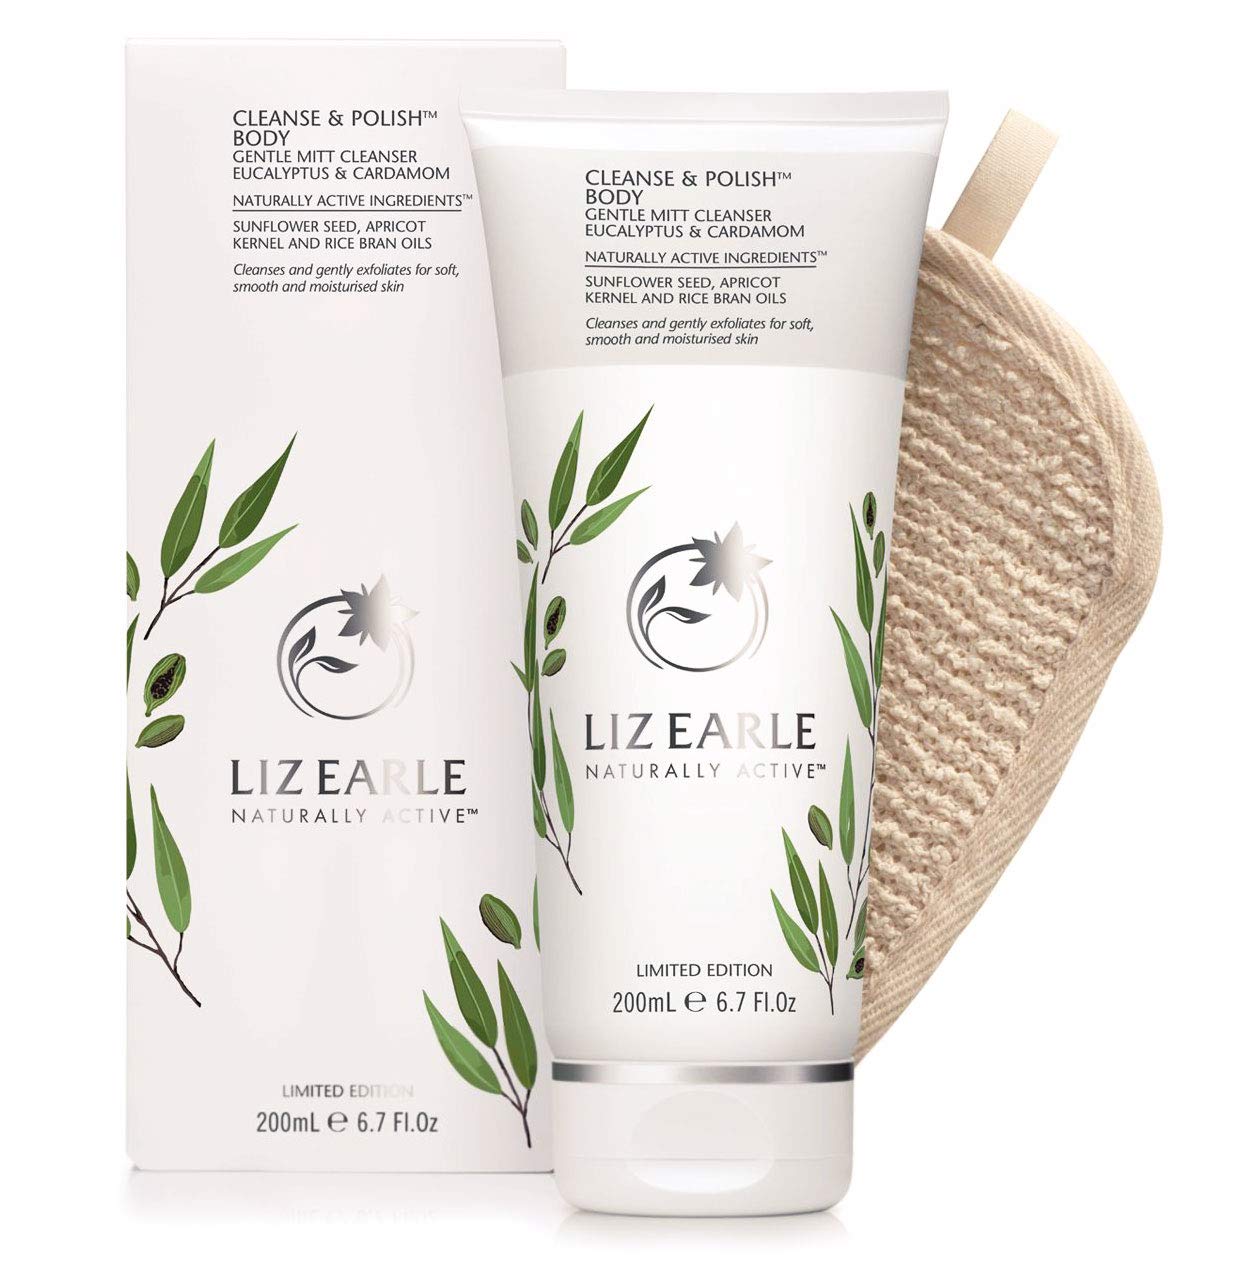 Liz Earle Cleanse and Polish Body, Gentle Mitt Cleanser (Eucalyptus and Cardamon)